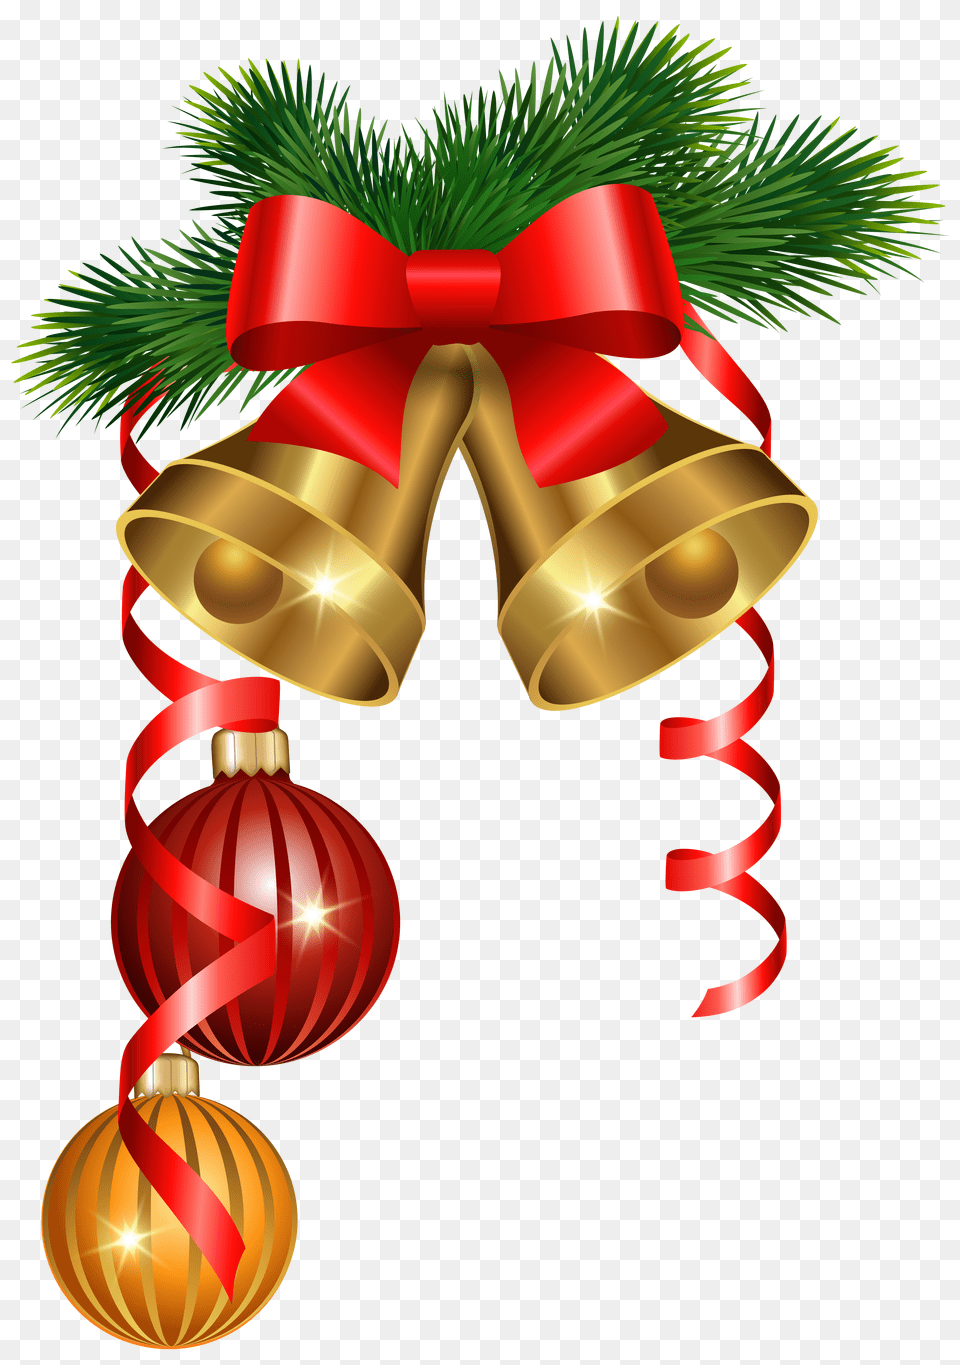 Christmas Golden Bells And Ornaments Clipart Image Transparent Background Christmas Bell, Plant, Tree, Dynamite, Weapon Free Png Download